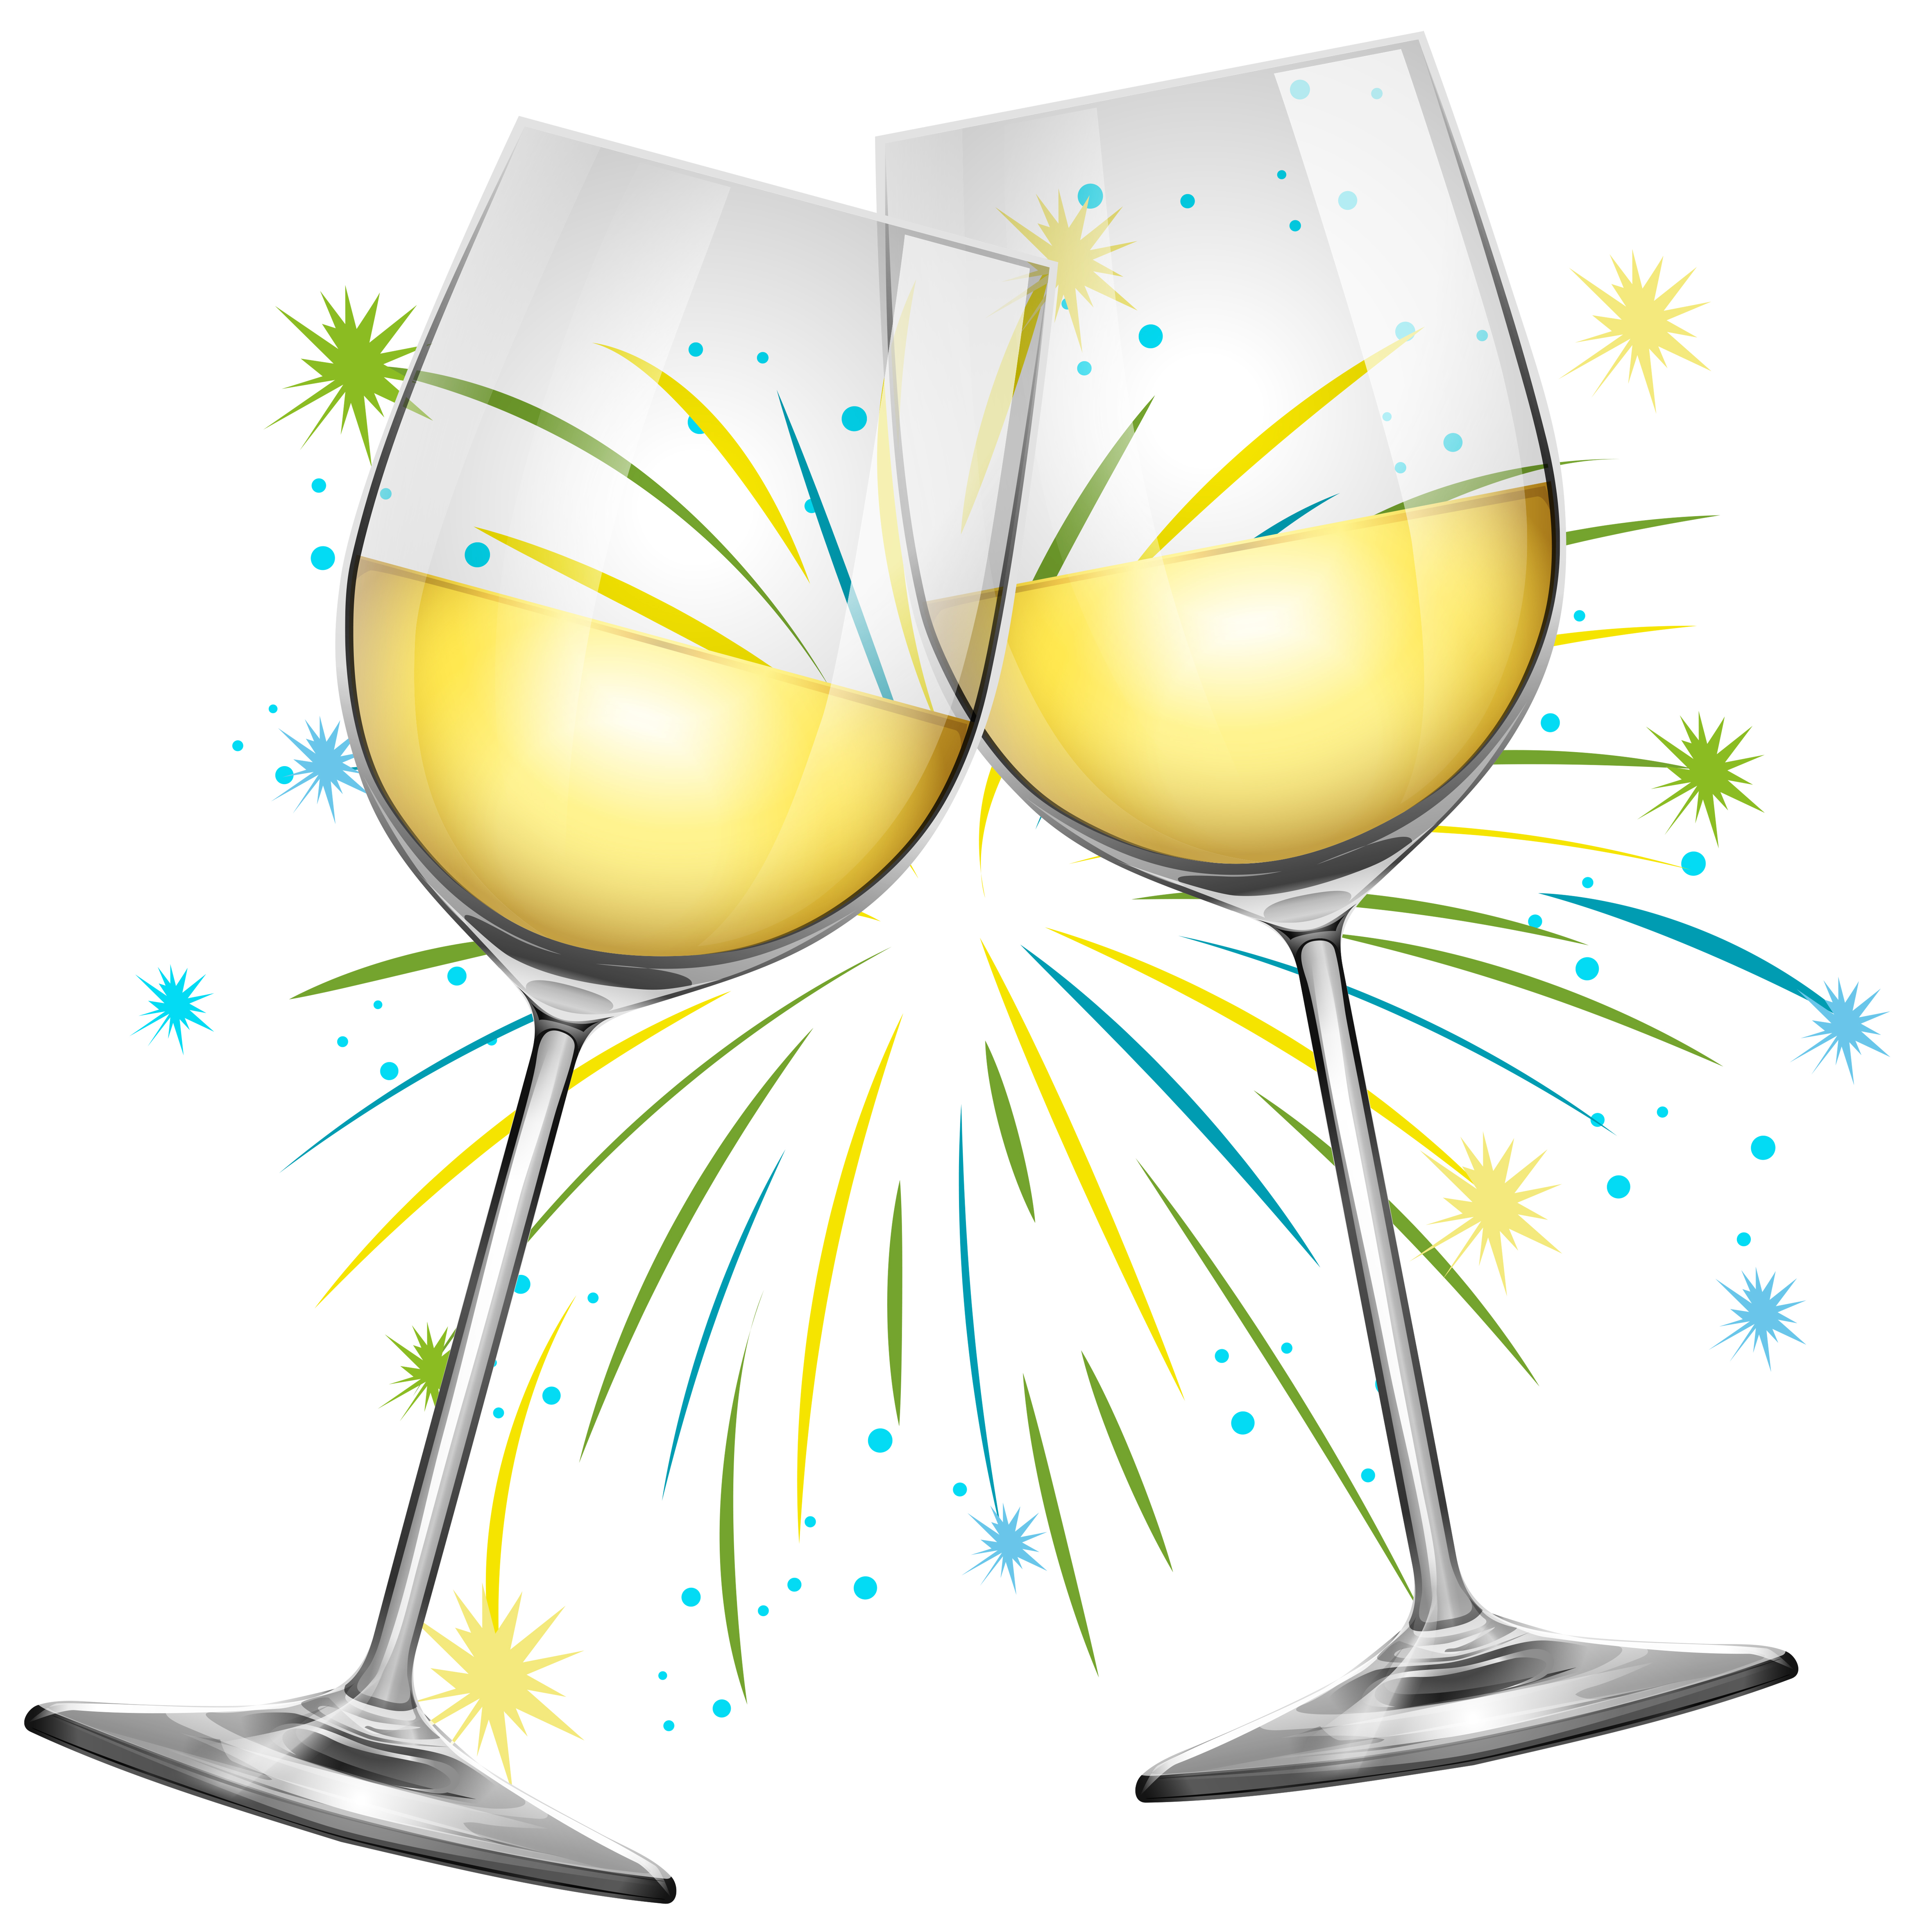 https://static.vecteezy.com/system/resources/previews/000/447/478/original/two-wine-glasses-and-firework-background-vector.jpg